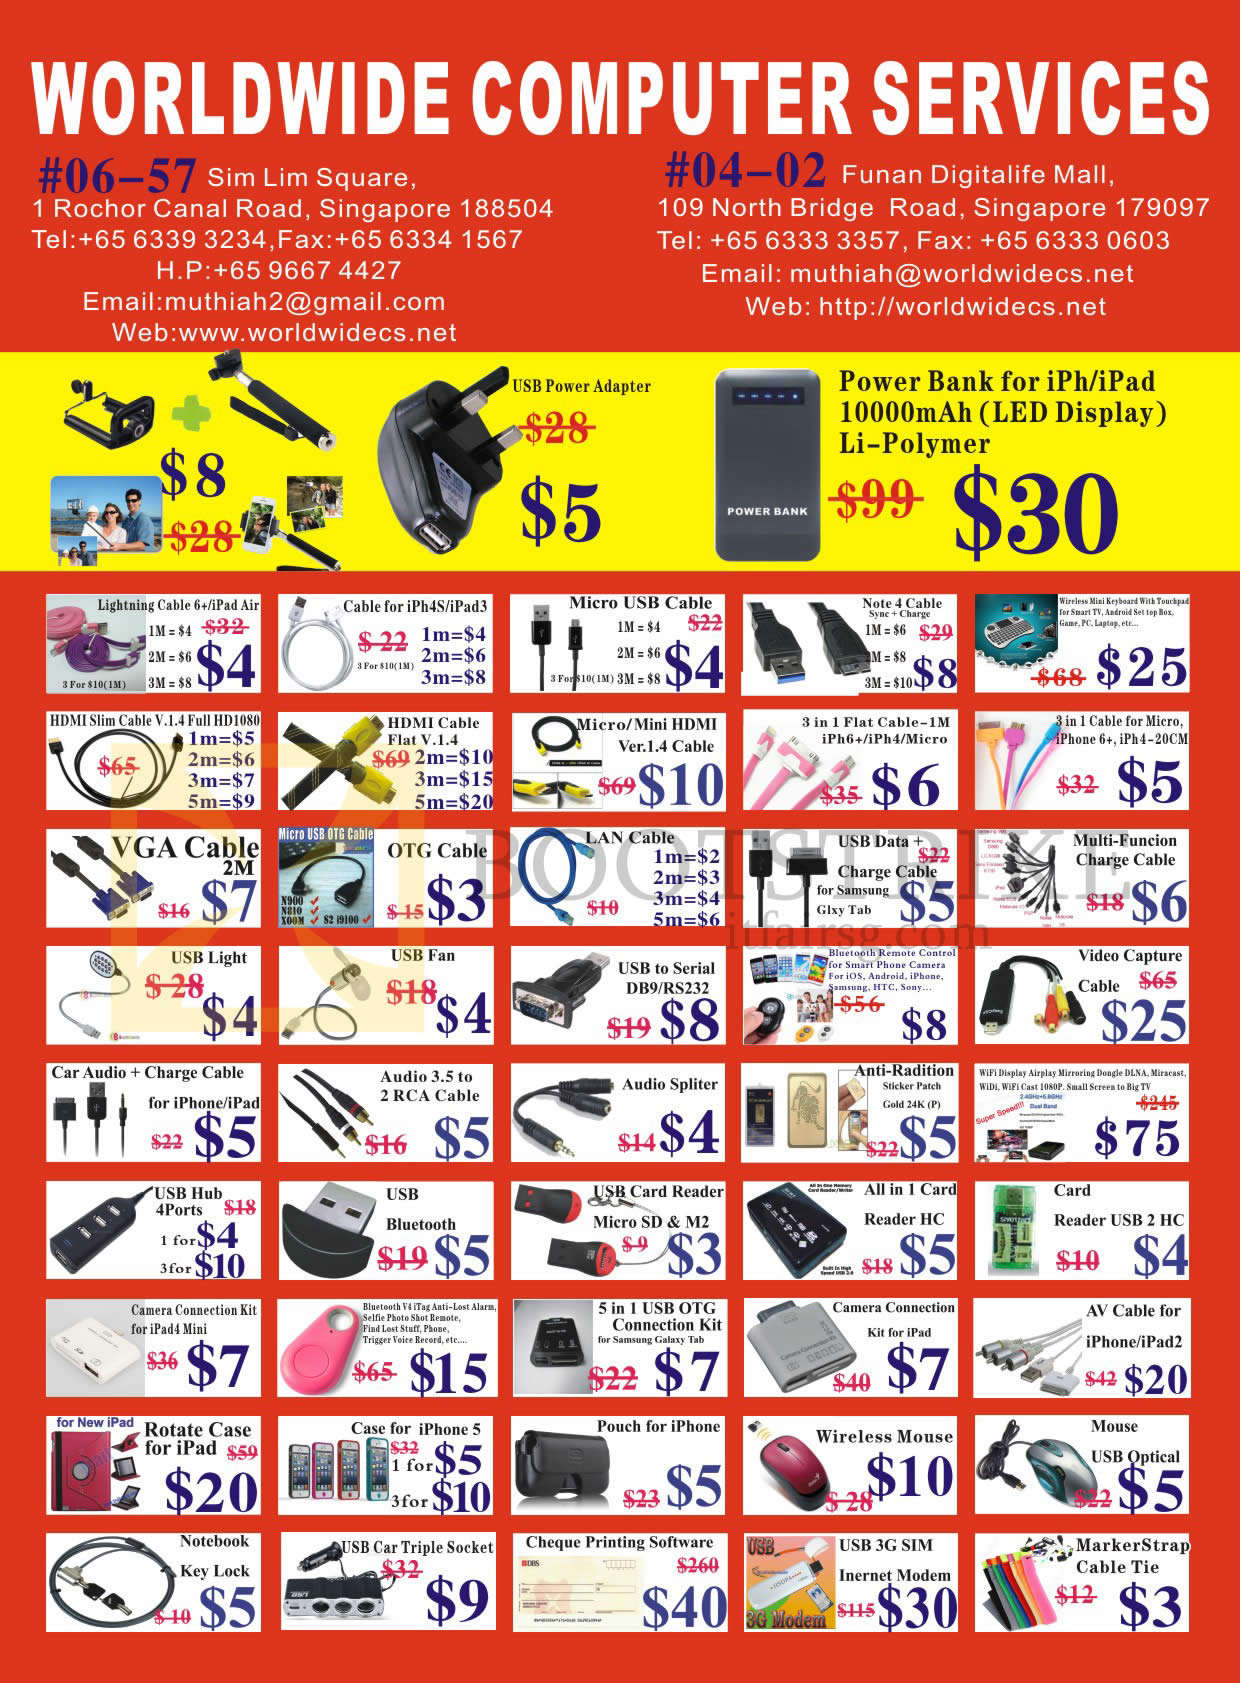 PC SHOW 2015 price list image brochure of Worldwide Computer Services Cables, Pouches, Cases, Mouse, USB Hub, Card Readers